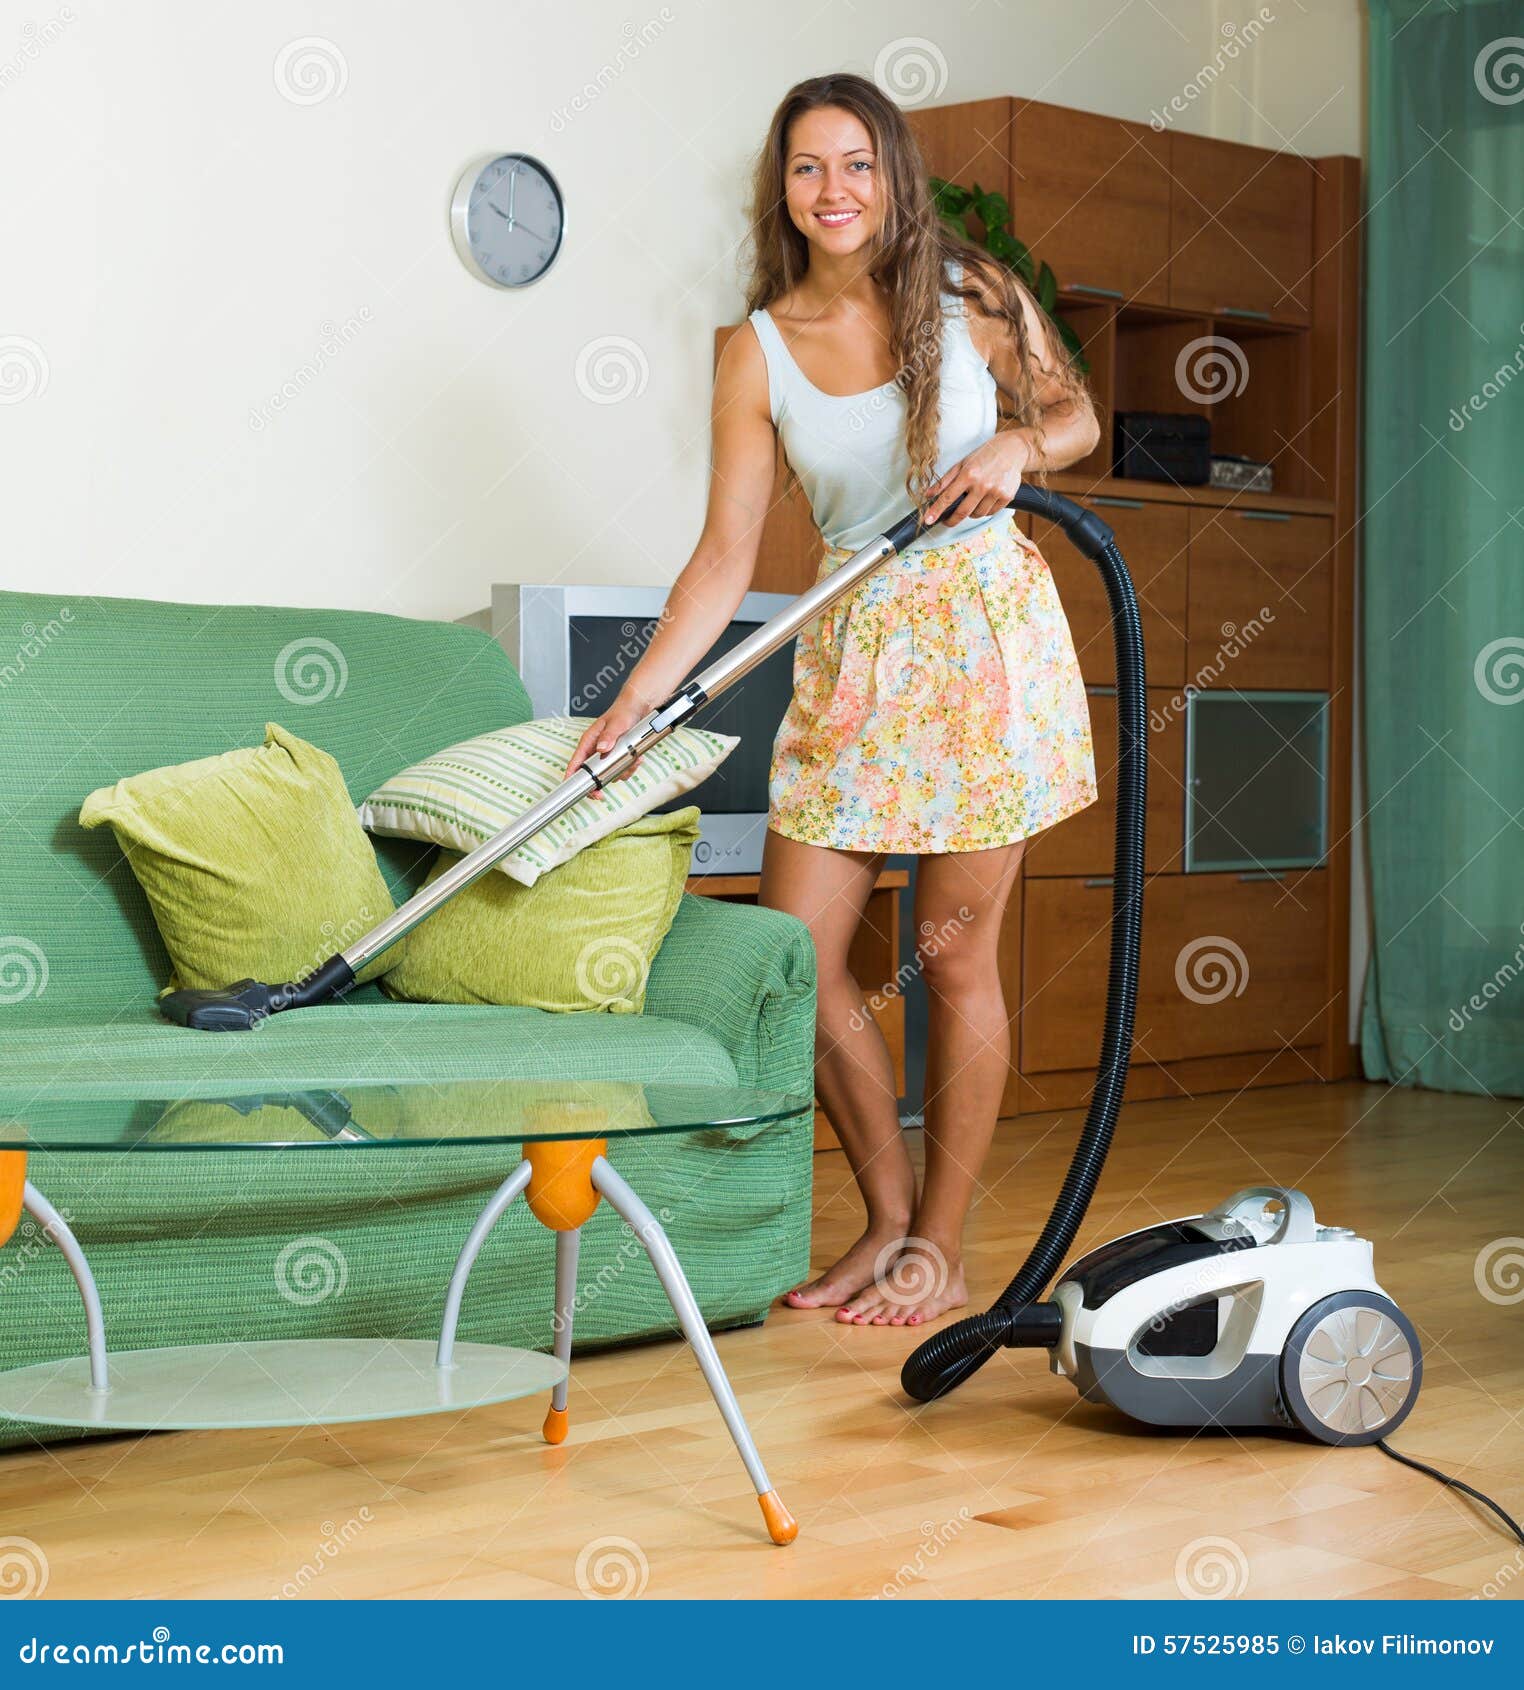 Housewife In Skirt Cleaning With Vacuum Cleaner Sto